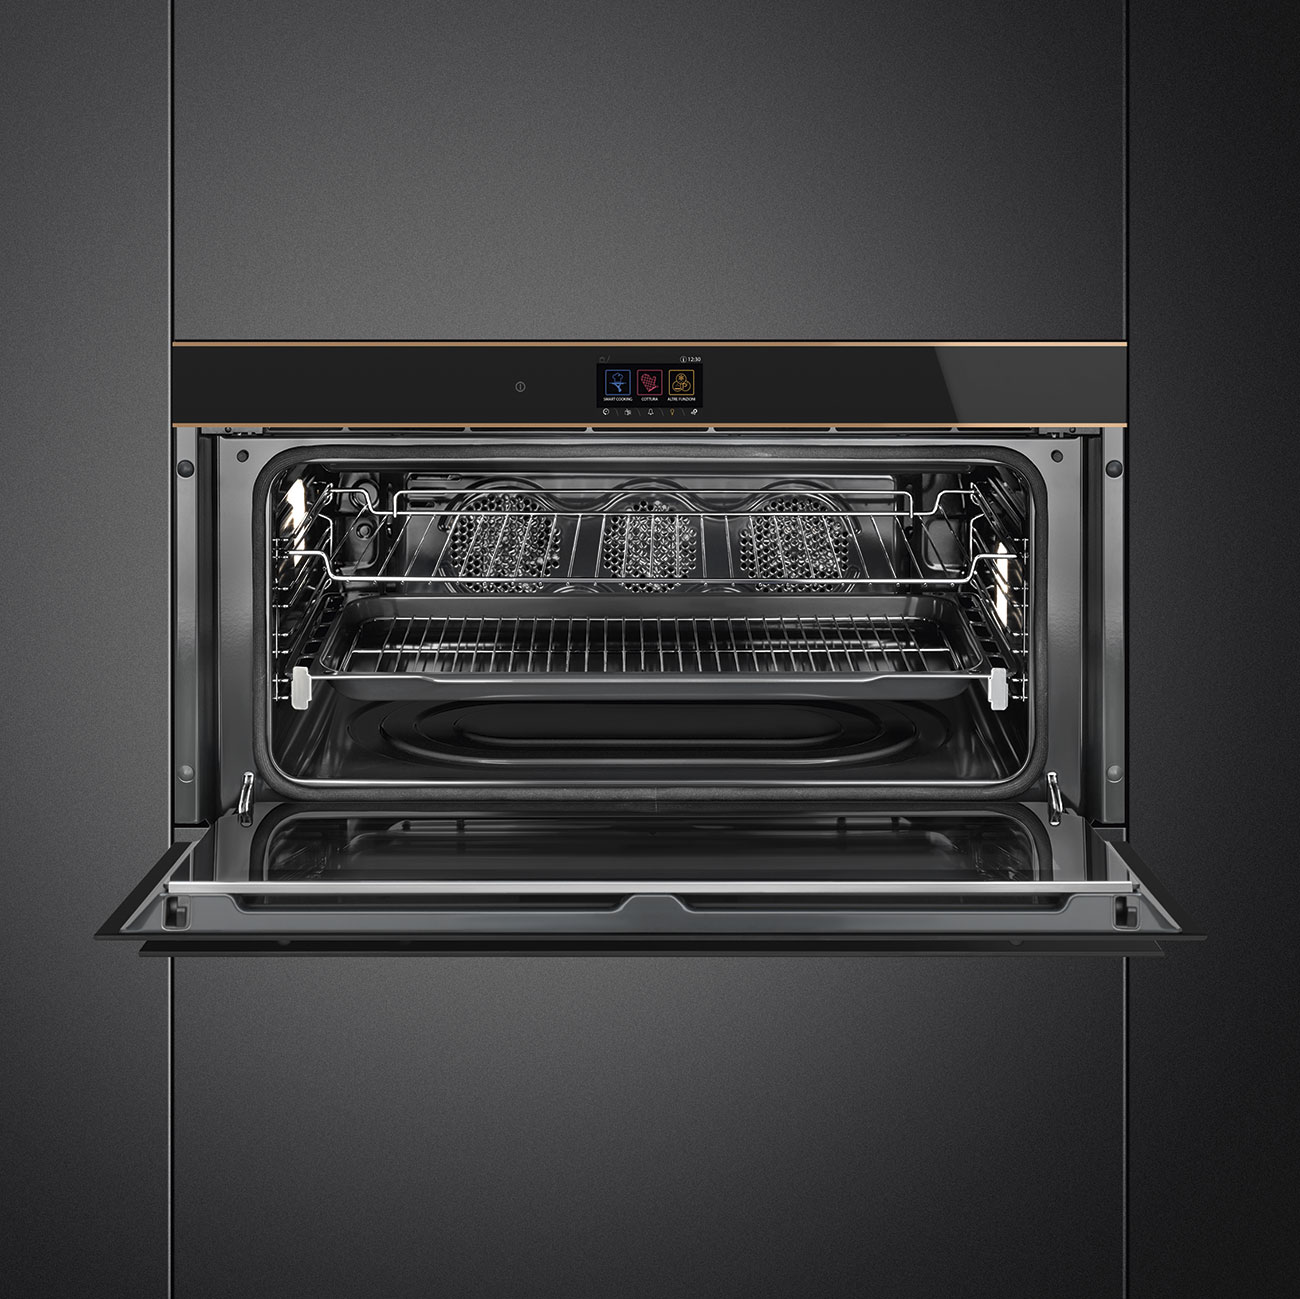 Oven Thermo-ventilated Reduced height 90cm Smeg_5